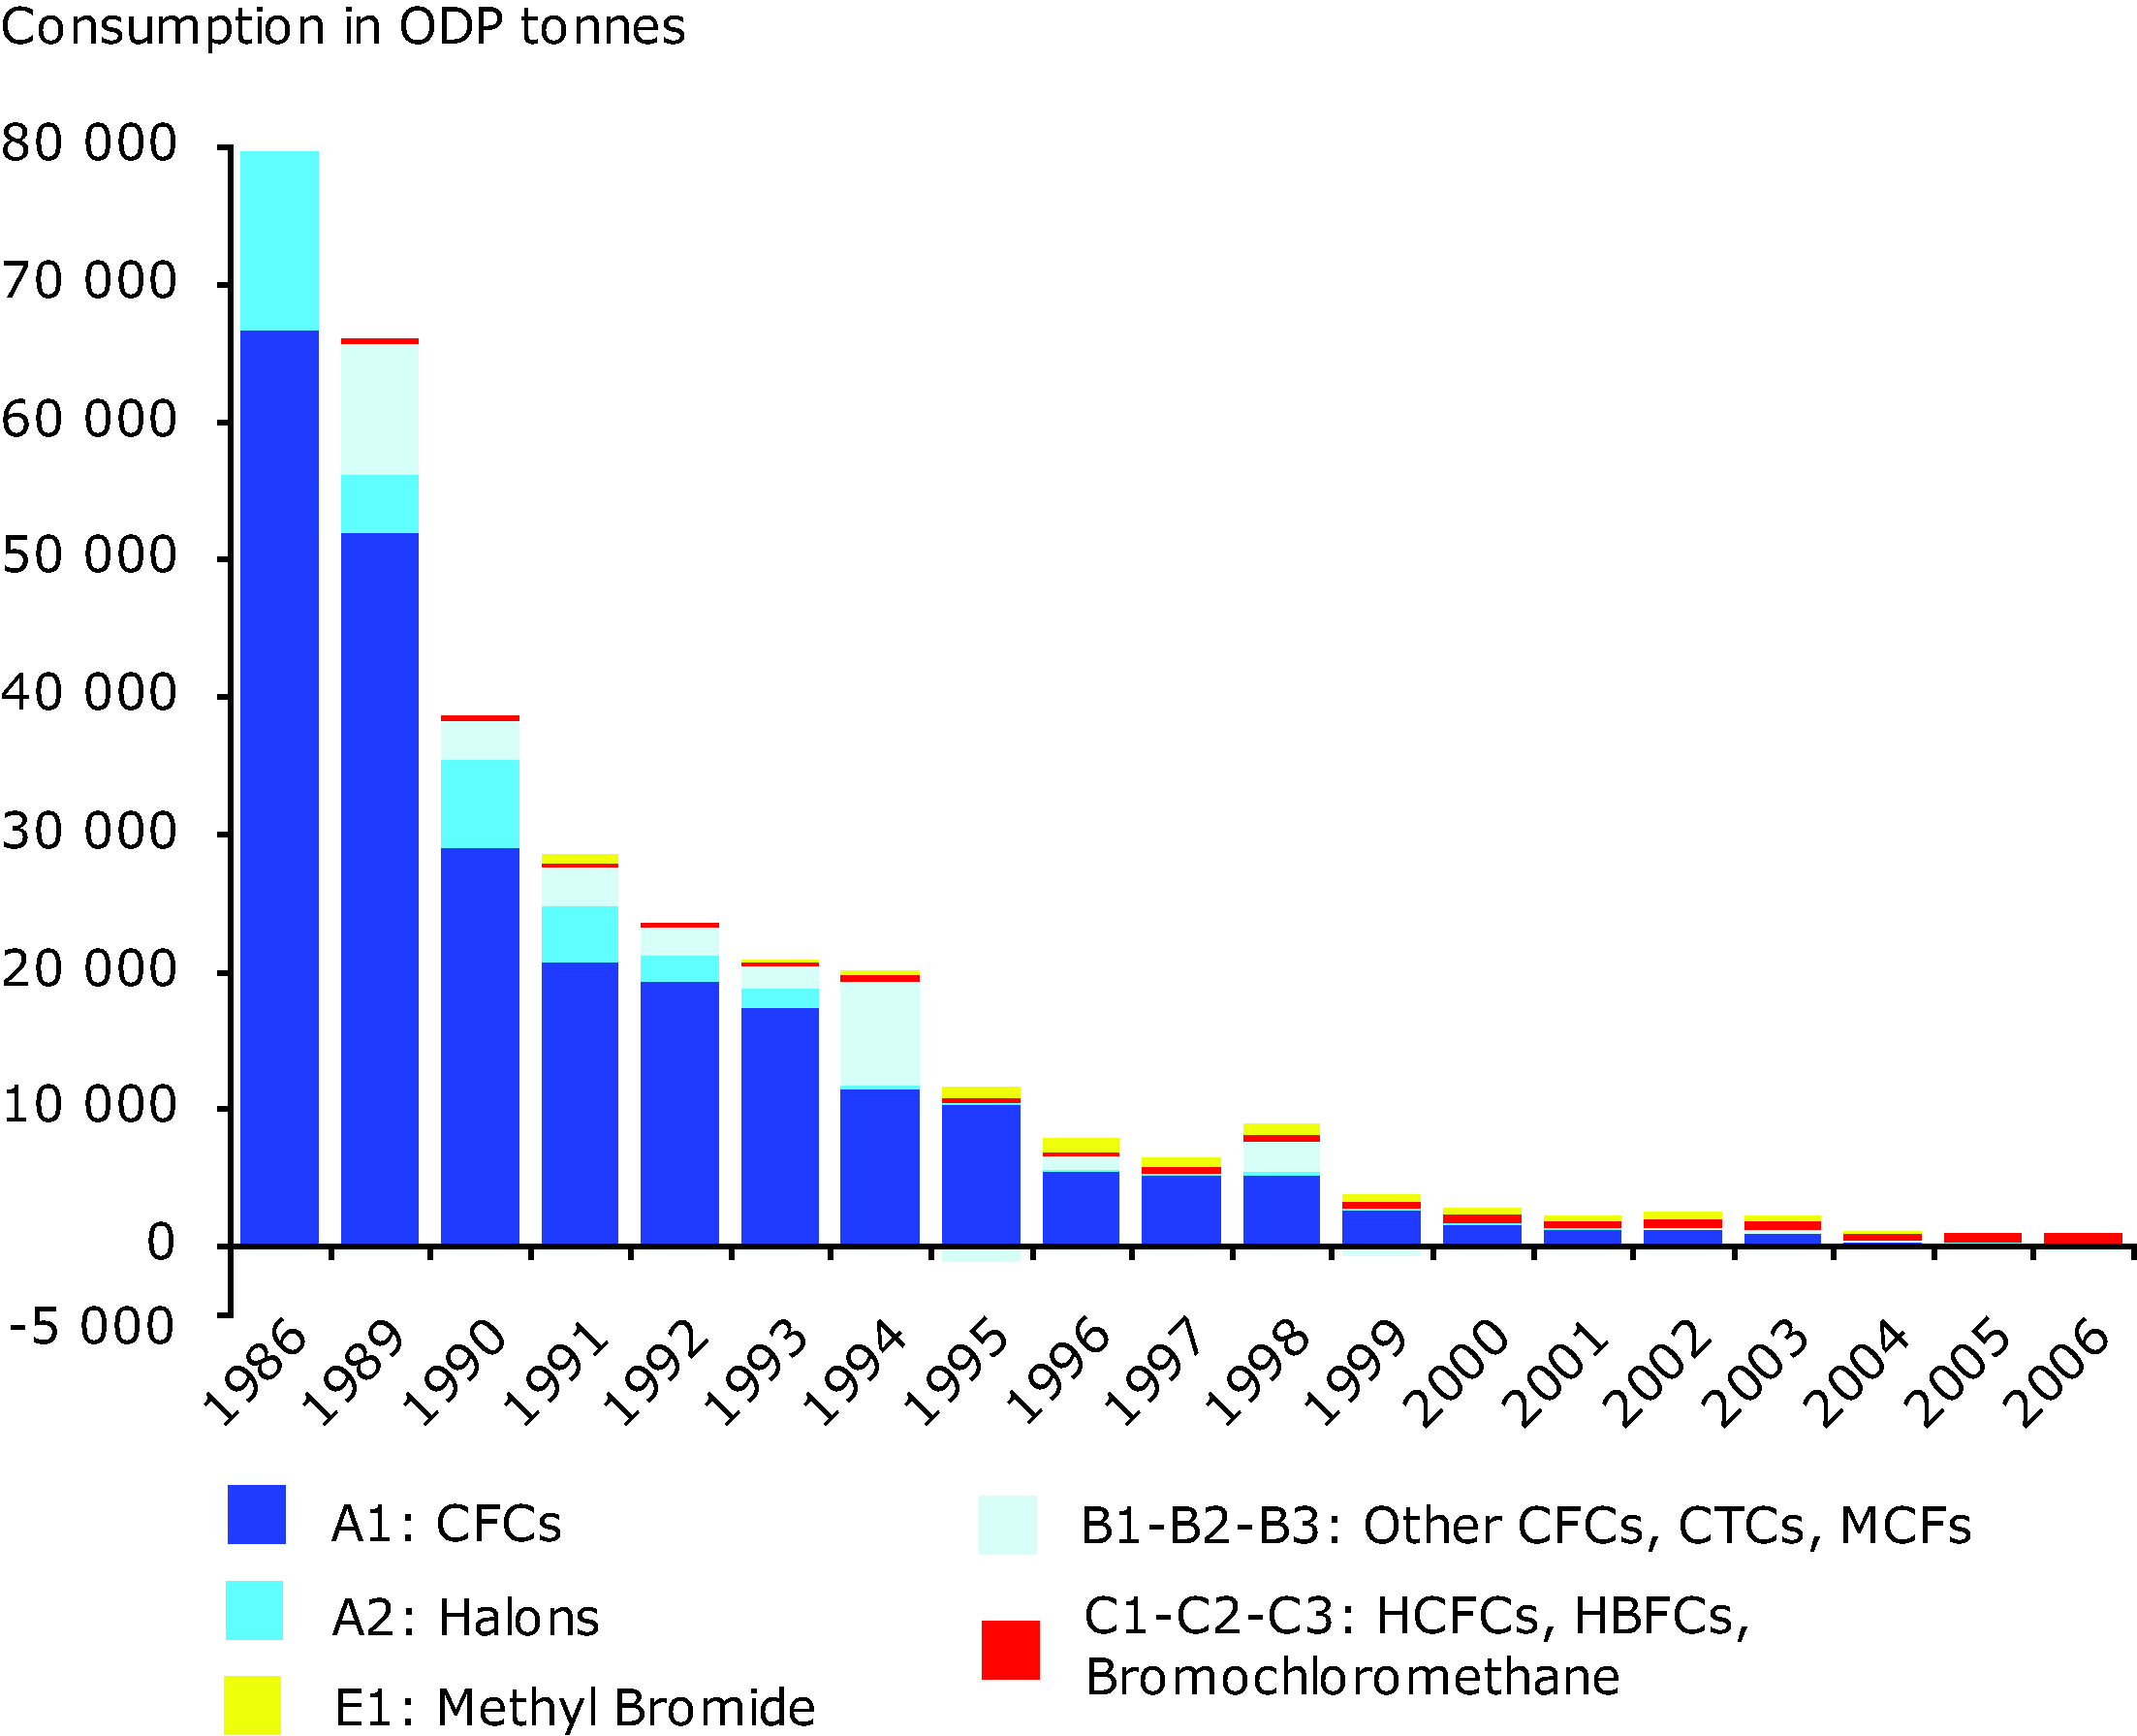 Consumption of ozone depleting substances in EU-27, 1986-2006